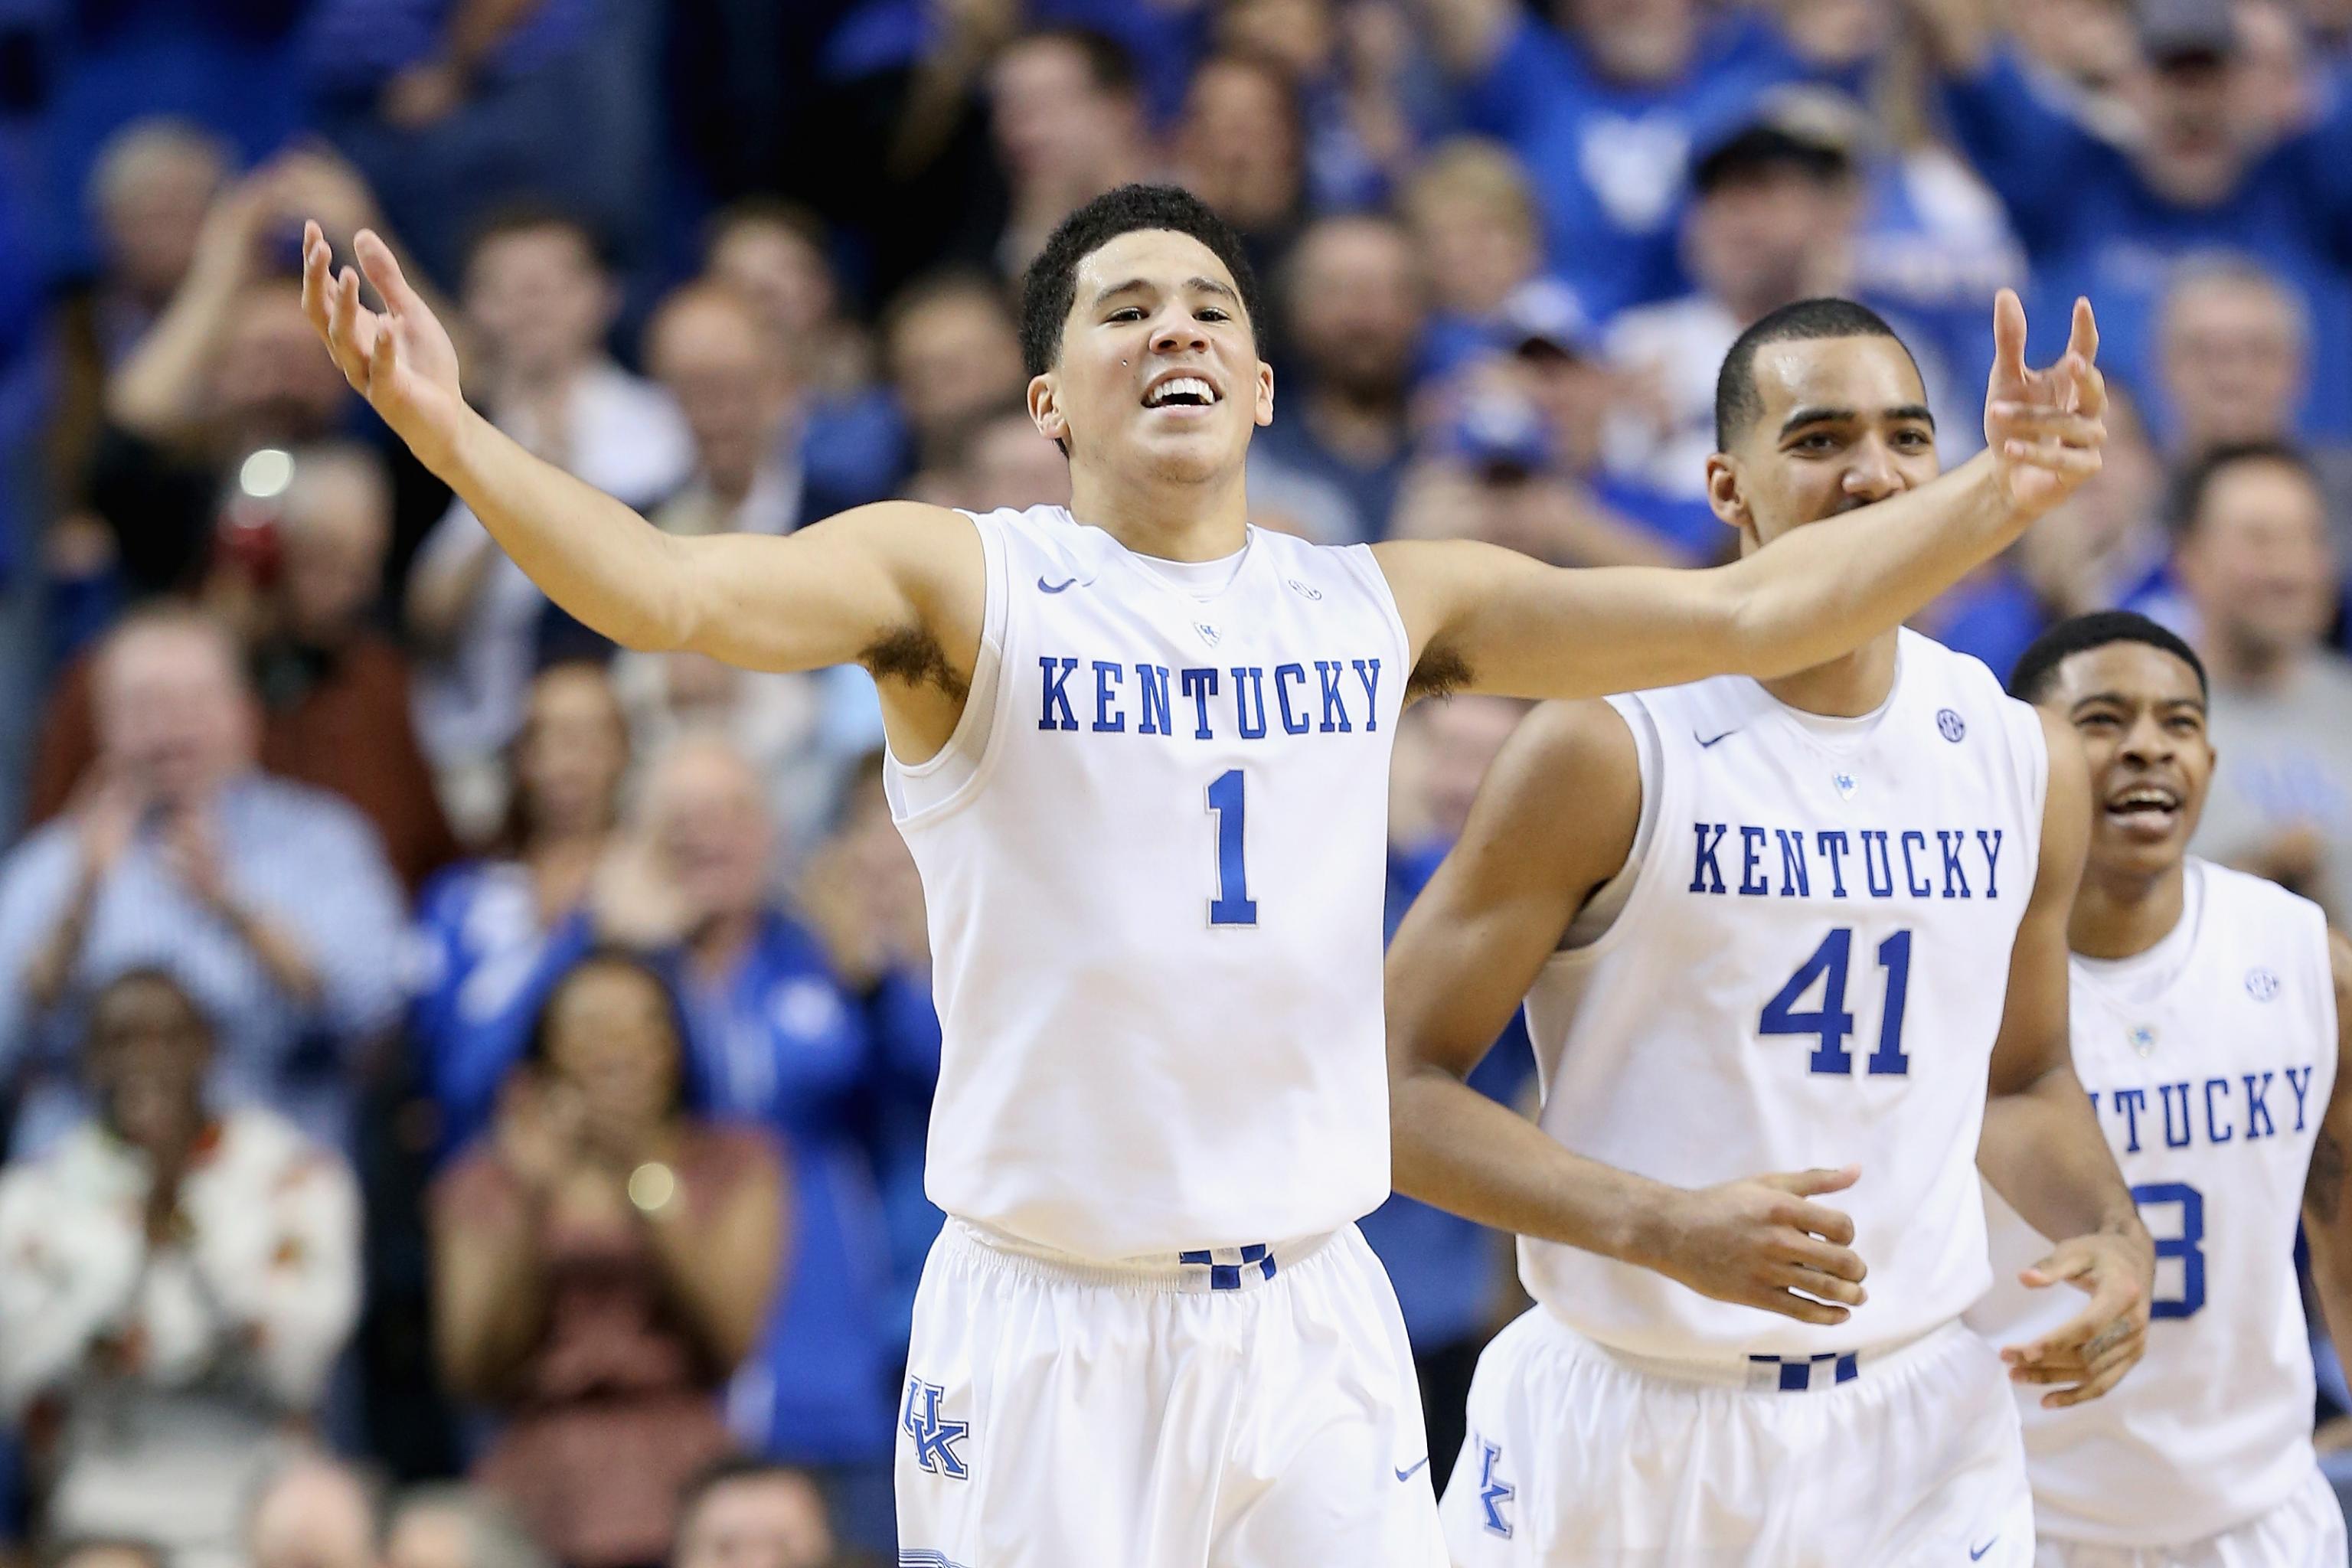 Kentucky Basketball: Is Devin Booker Capable of Being Wildcats' Go